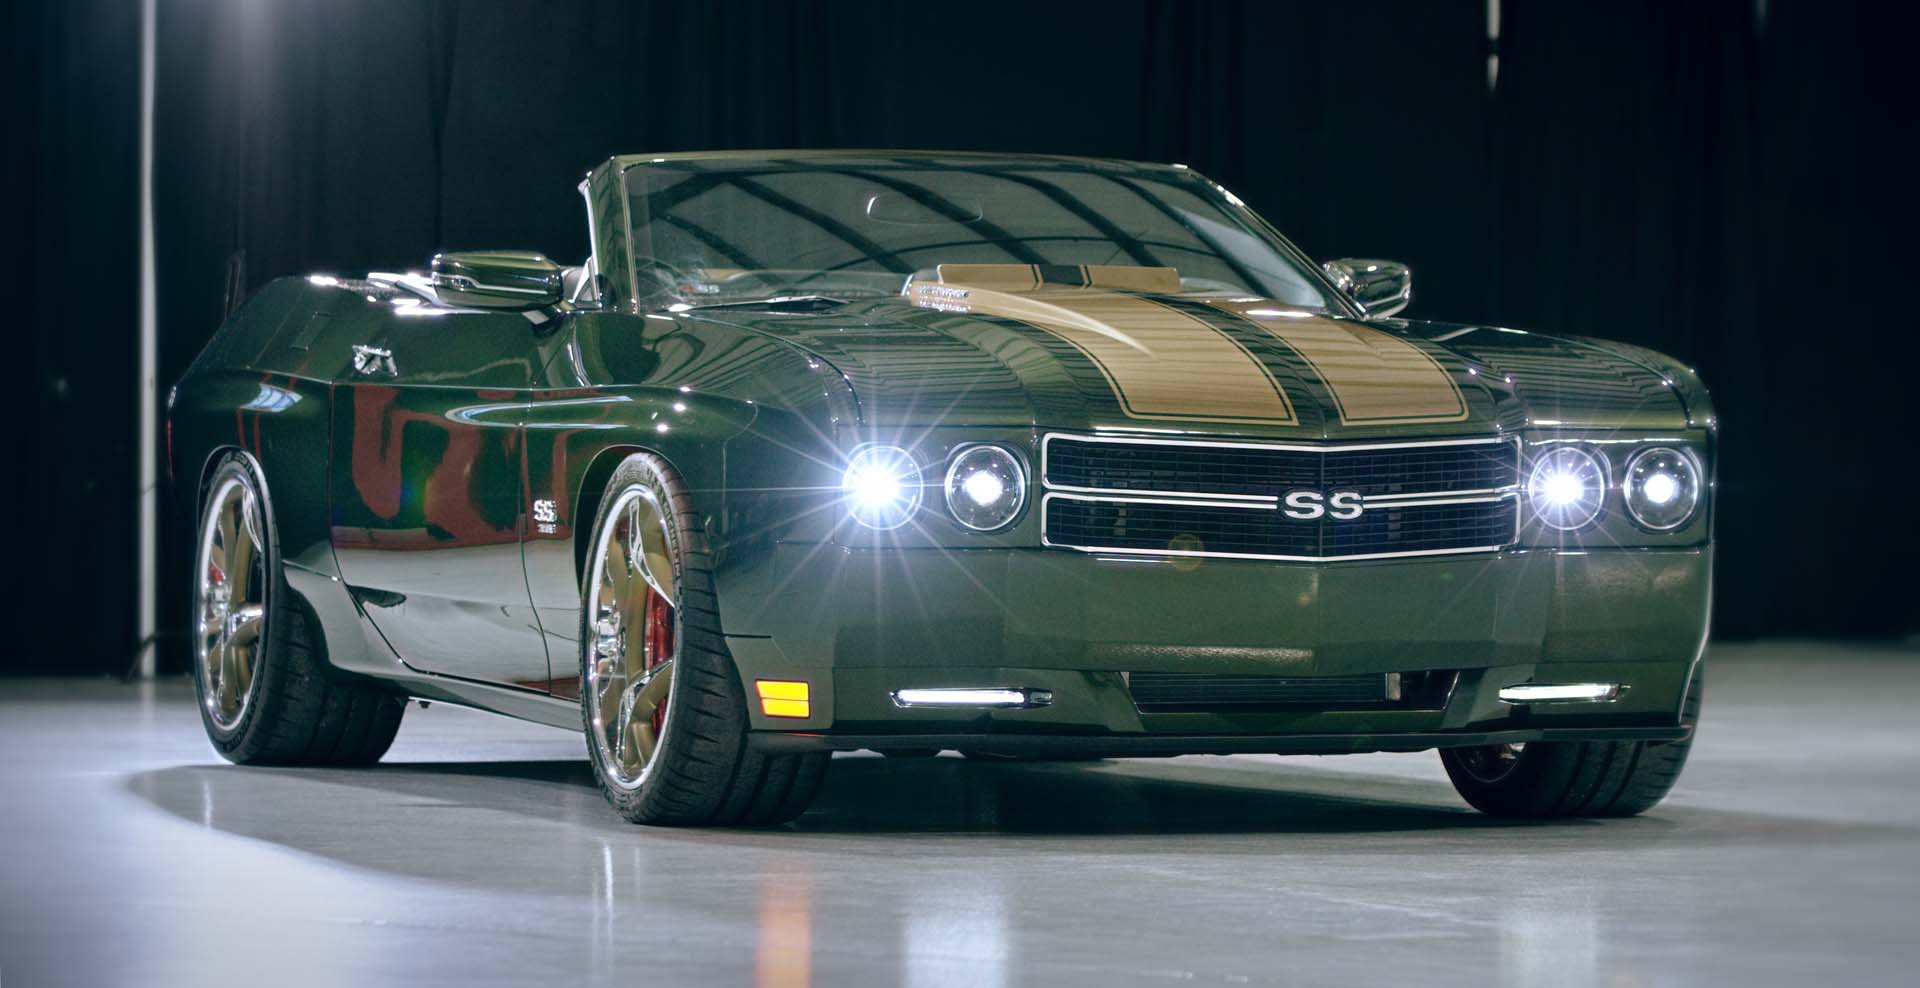 Trans Am Worldwide 70/SS throws it back to the 1970 Chevelle Super Sport